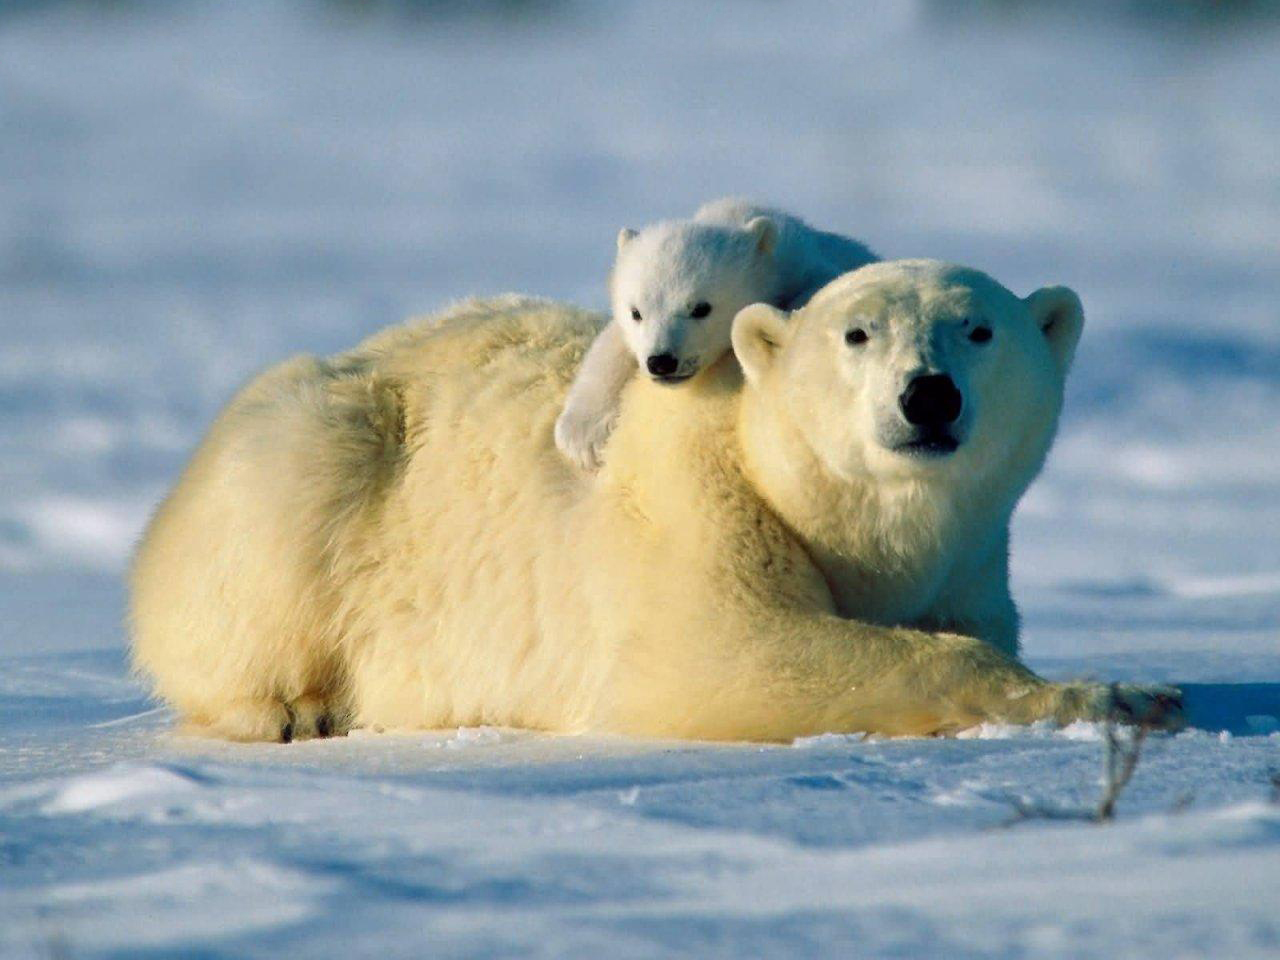 Unlike biologists, the Inuit have not observed a decline in polar bear populations recently (www.furtrimisatrap.com)